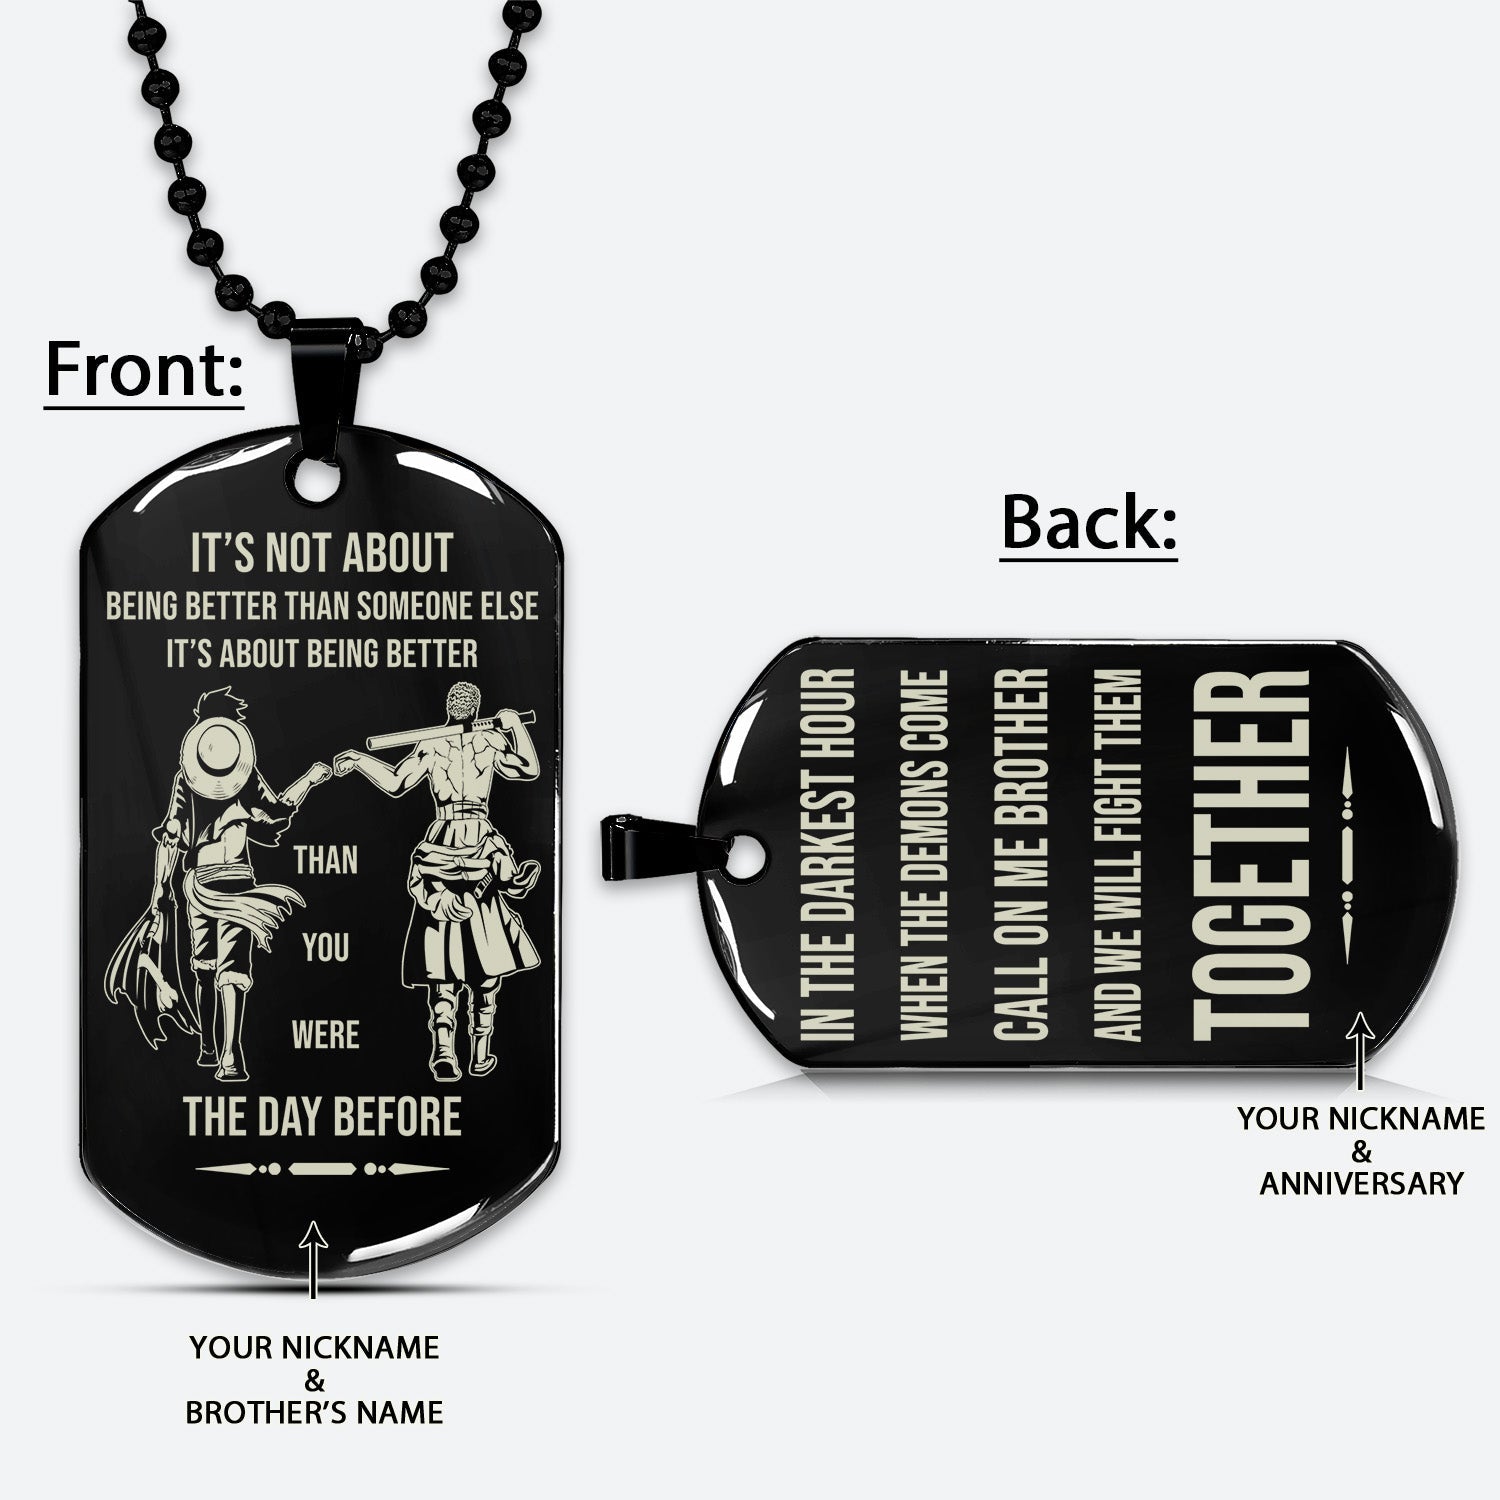 OPD023 - Call On Me Brother - It's About Being Better Than You Were The Day Before - Monkey D. Luffy - Roronoa Zoro - One Piece Dog Tag - Engrave Double Sided Black Dog Tag